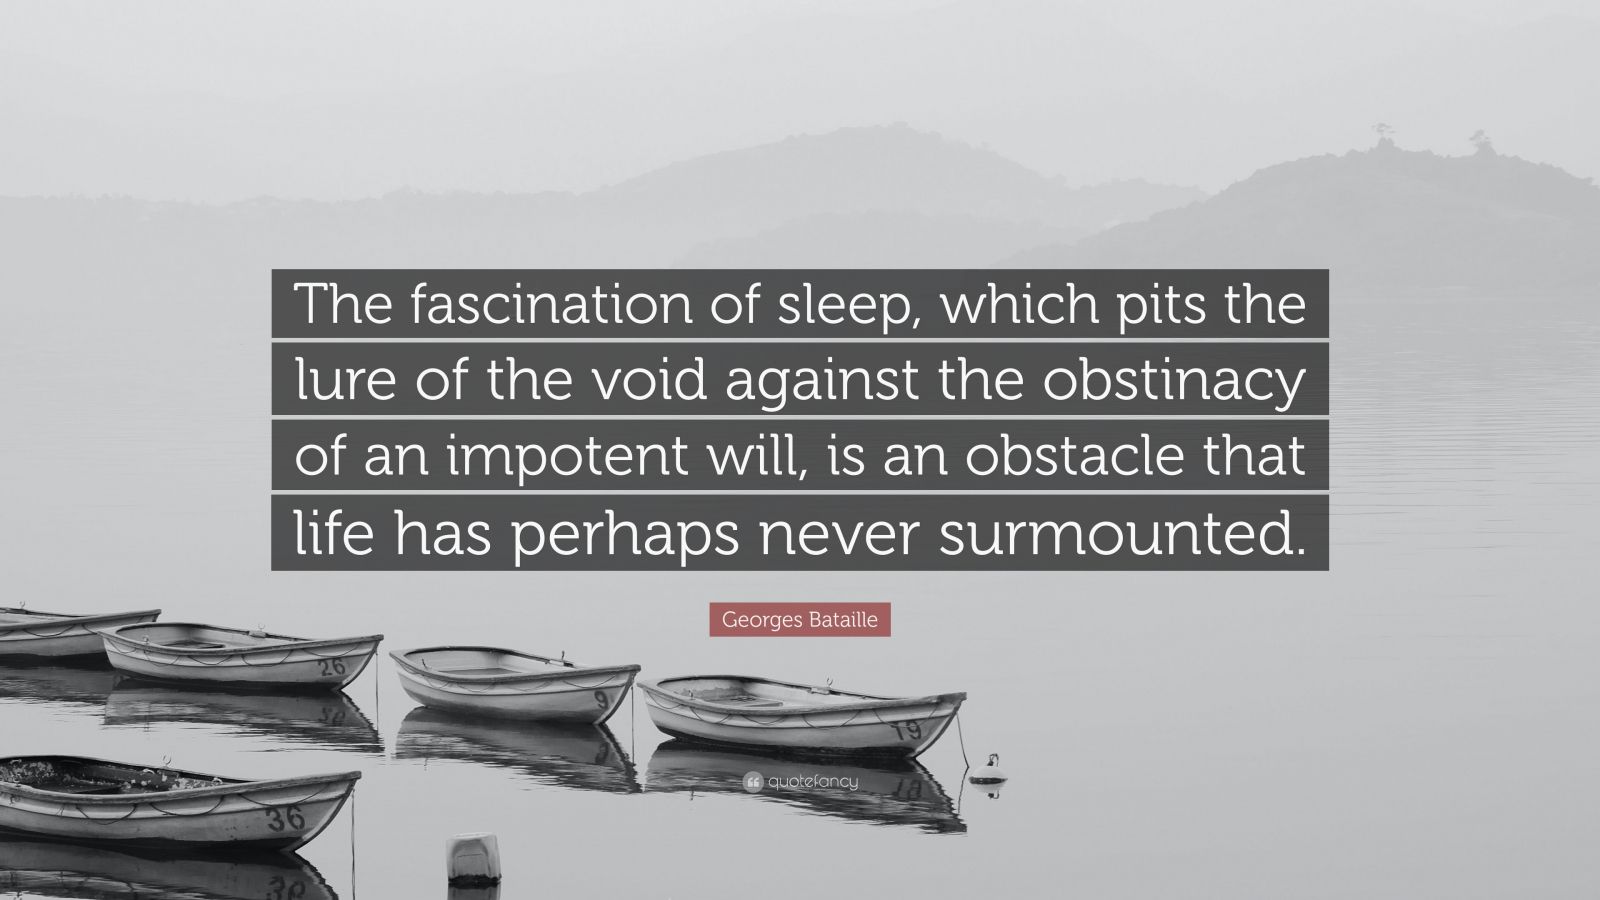 Georges Bataille Quote: “The fascination of sleep, which pits the lure